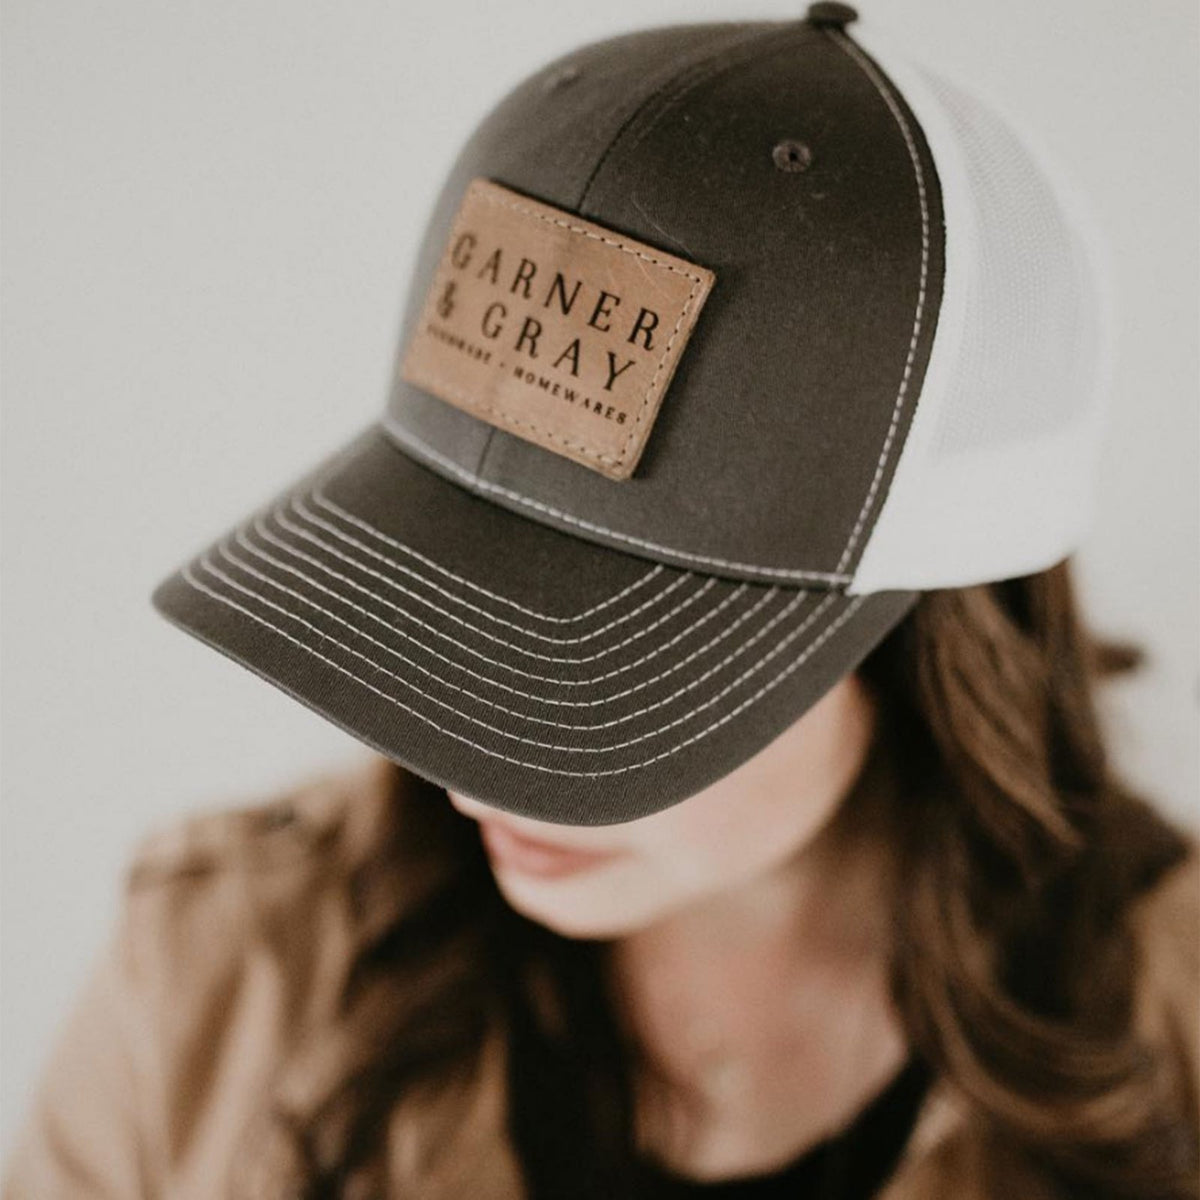 Classic Trucker Hats with Custom Embroidered Patches